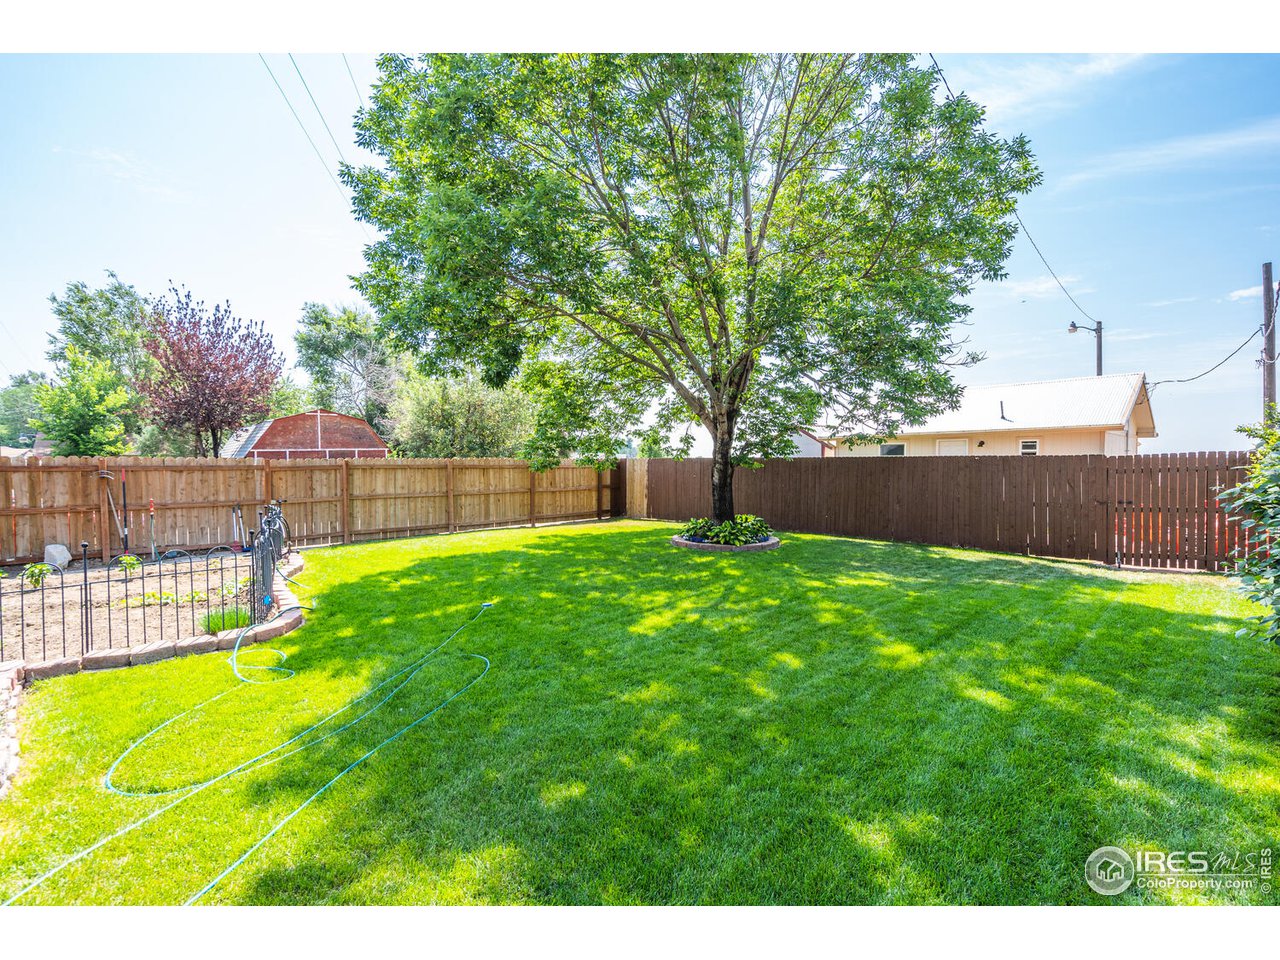 Fully fenced private backyard with mature landscaping and trees!